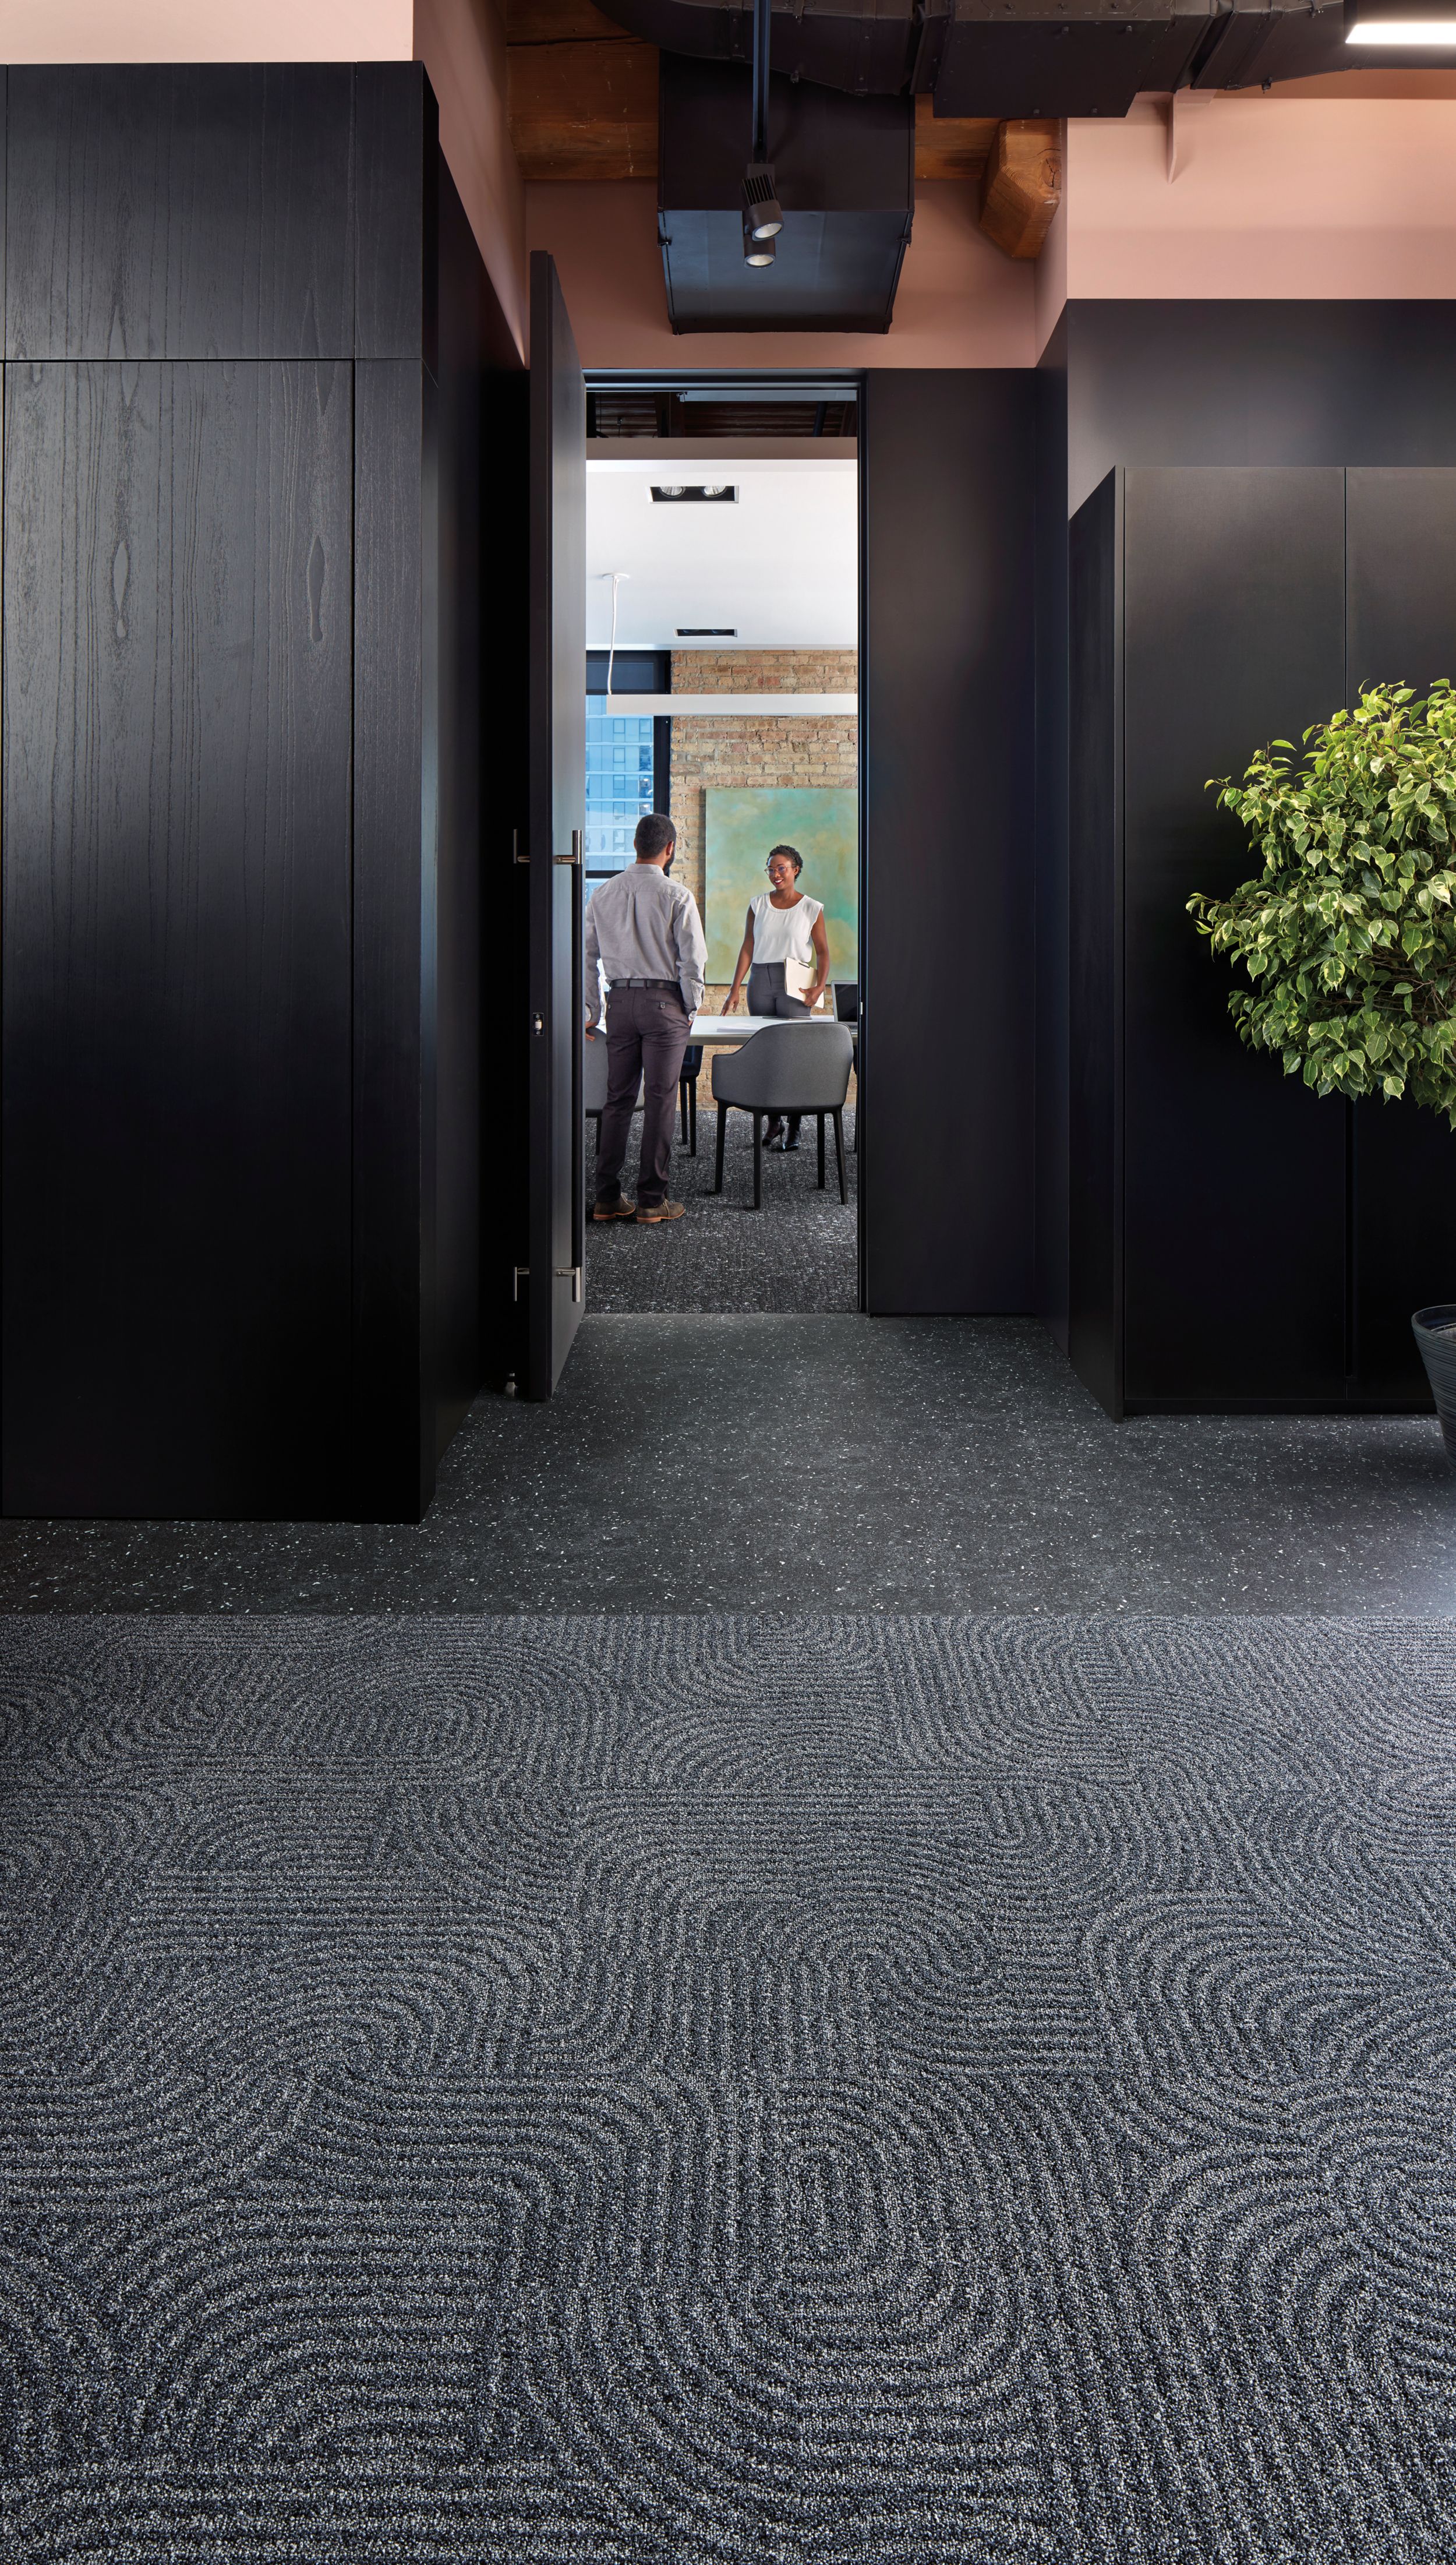 Interface Step this Way and Step Aside carpet tile with Walk the Aisle LVT in an office common area número de imagen 2